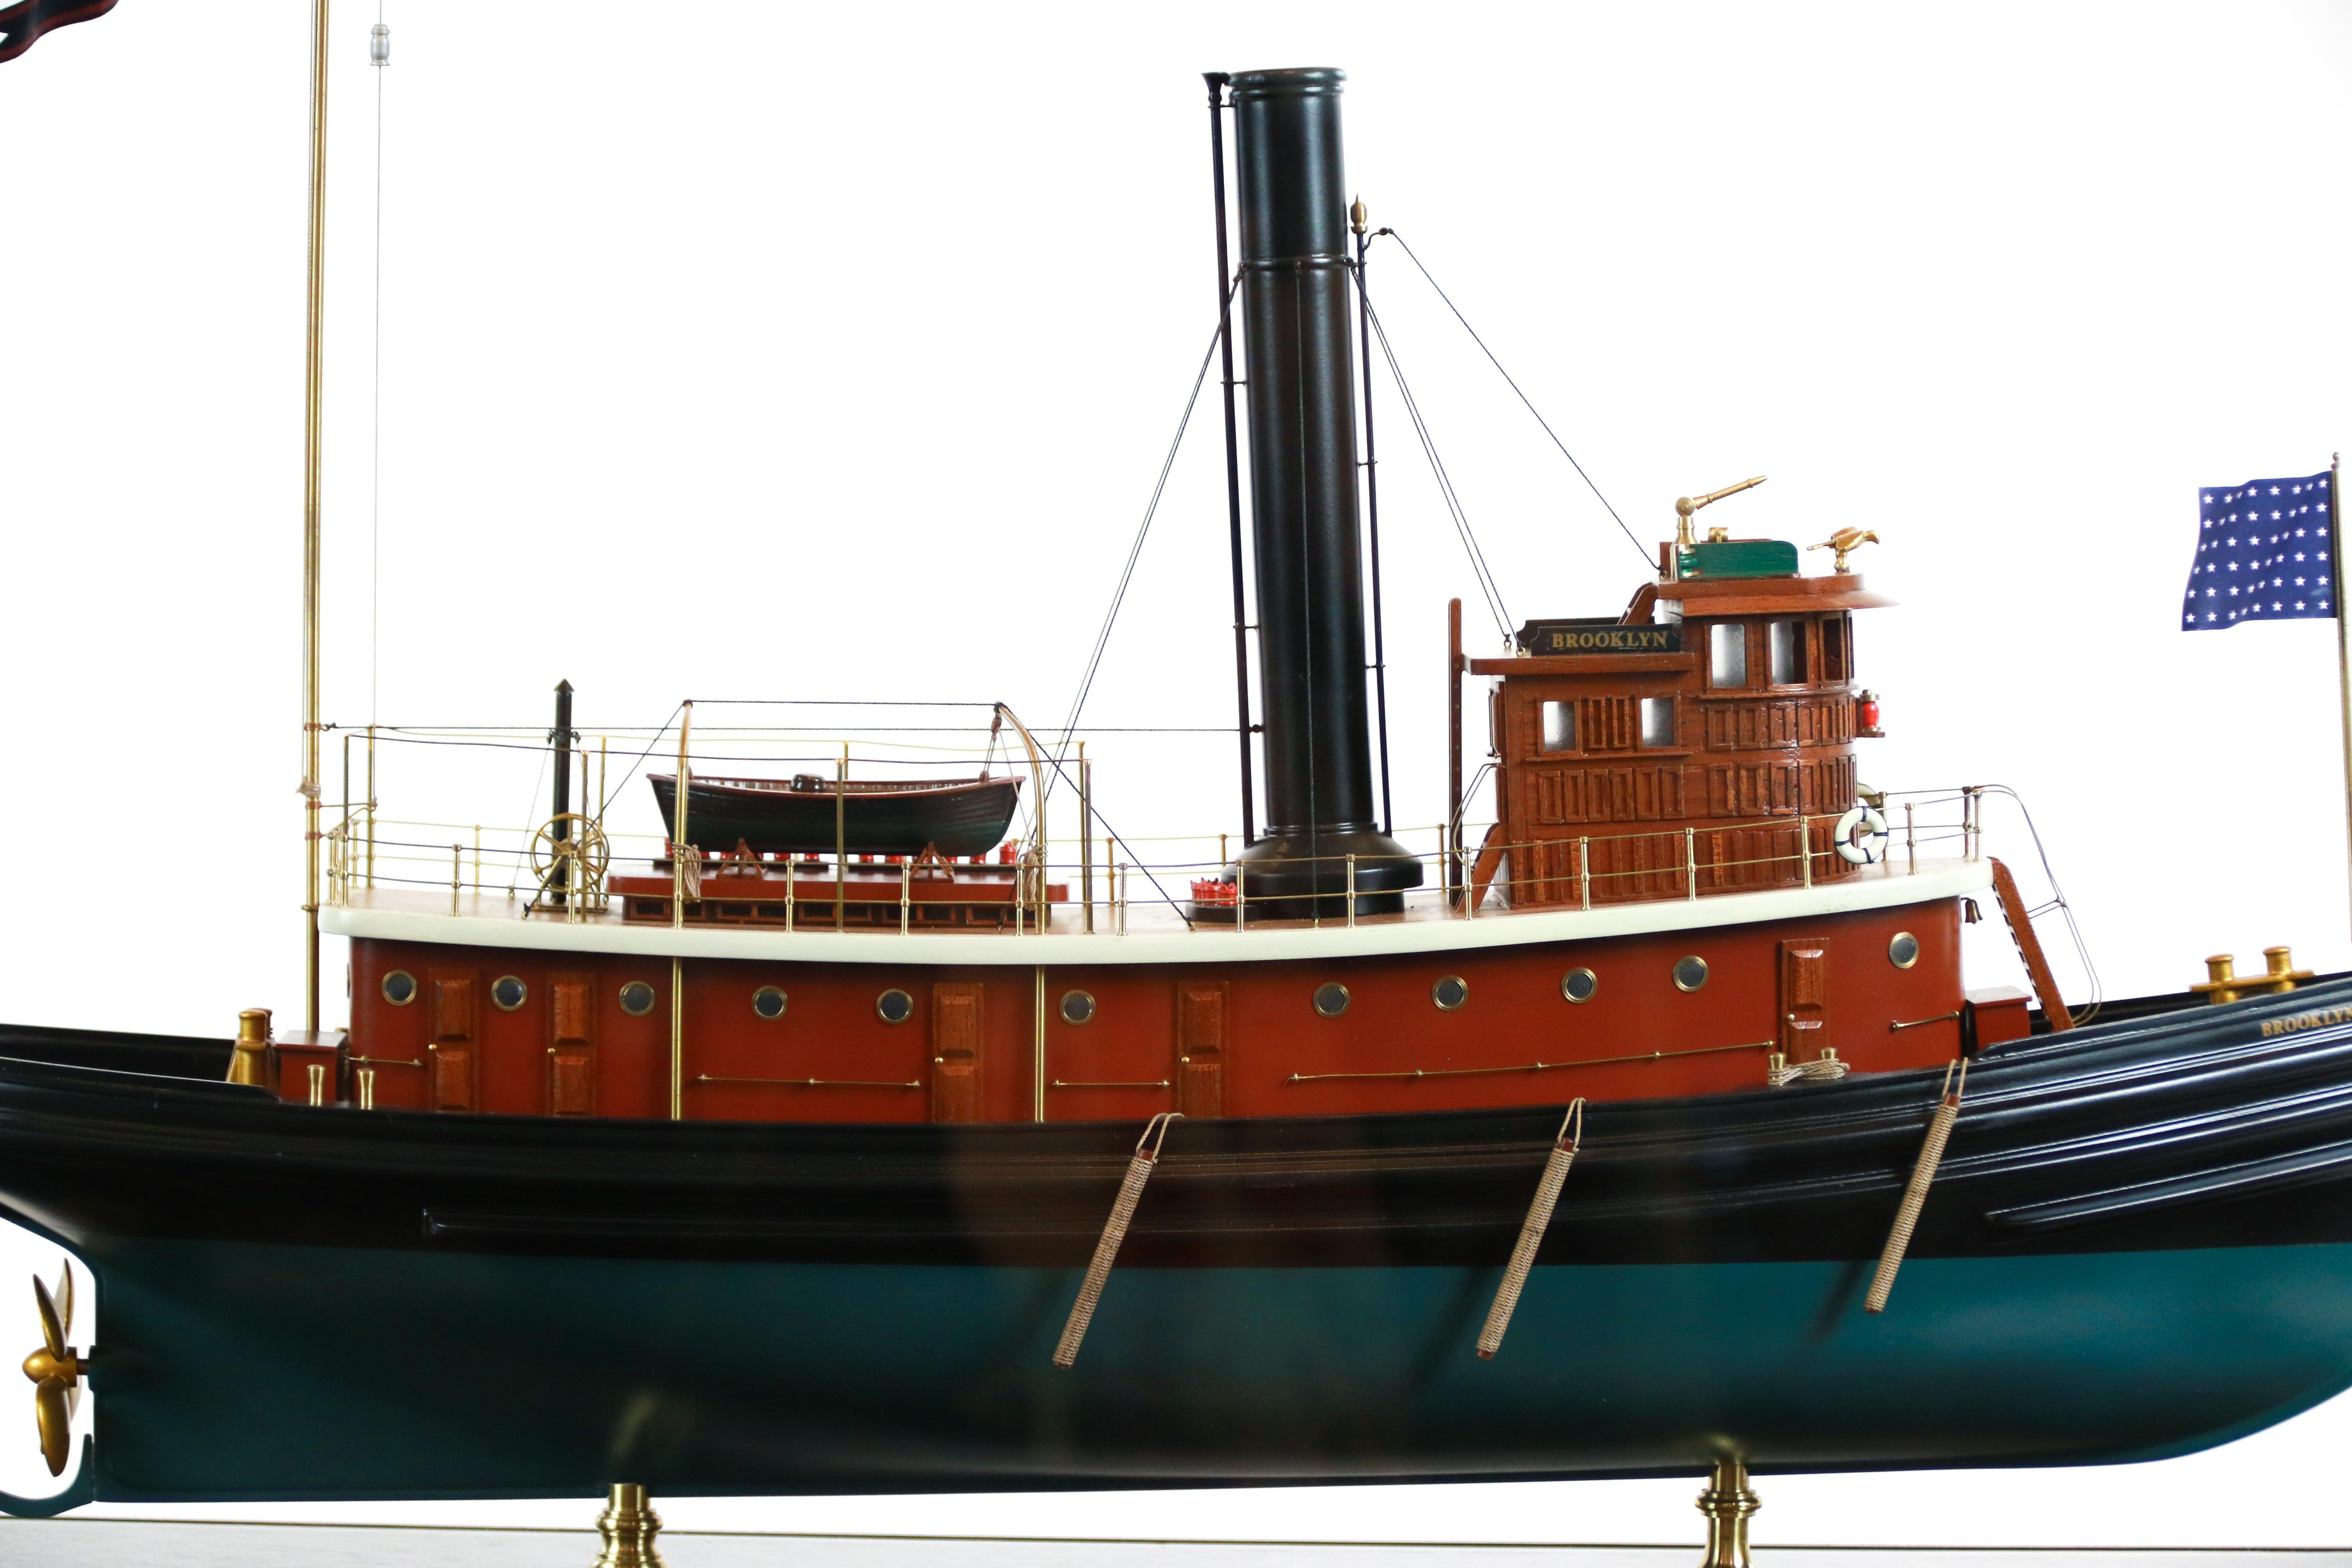 The harbor tug Brooklyn was designed and built in 1910 by William Cramp and Sons at Philadelphia, PA. Her intended purpose was for use at the Pennsylvania Railroad Company's New York piers. The Brooklyn measured 105 feet long overall. The model is